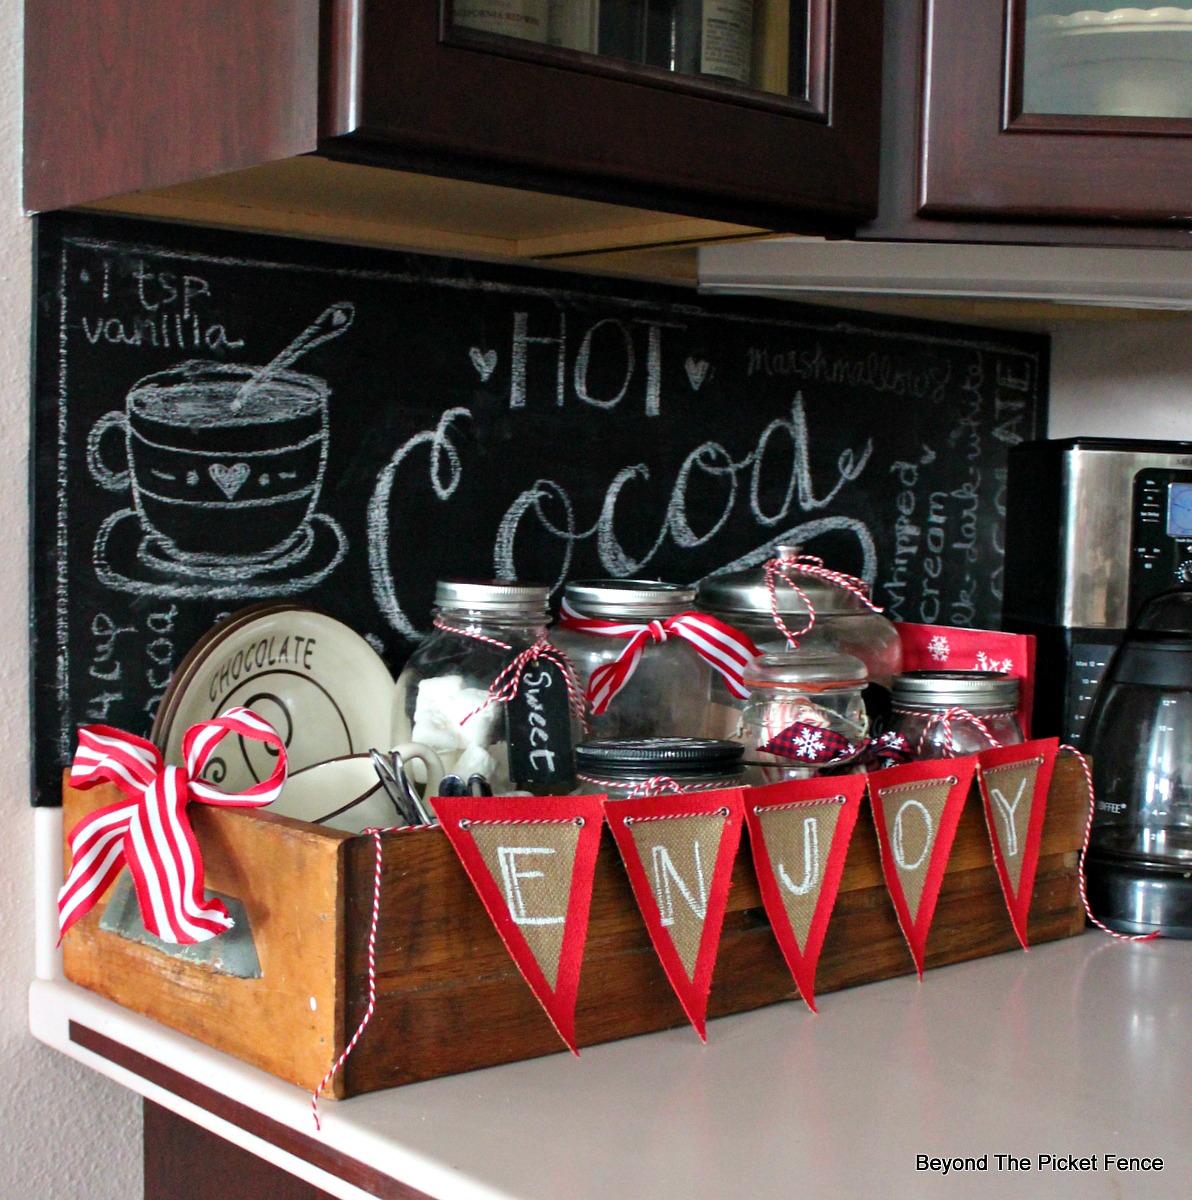 Mini Hot Cocoa Station on Kitchen Counter - Small Gestures Matter